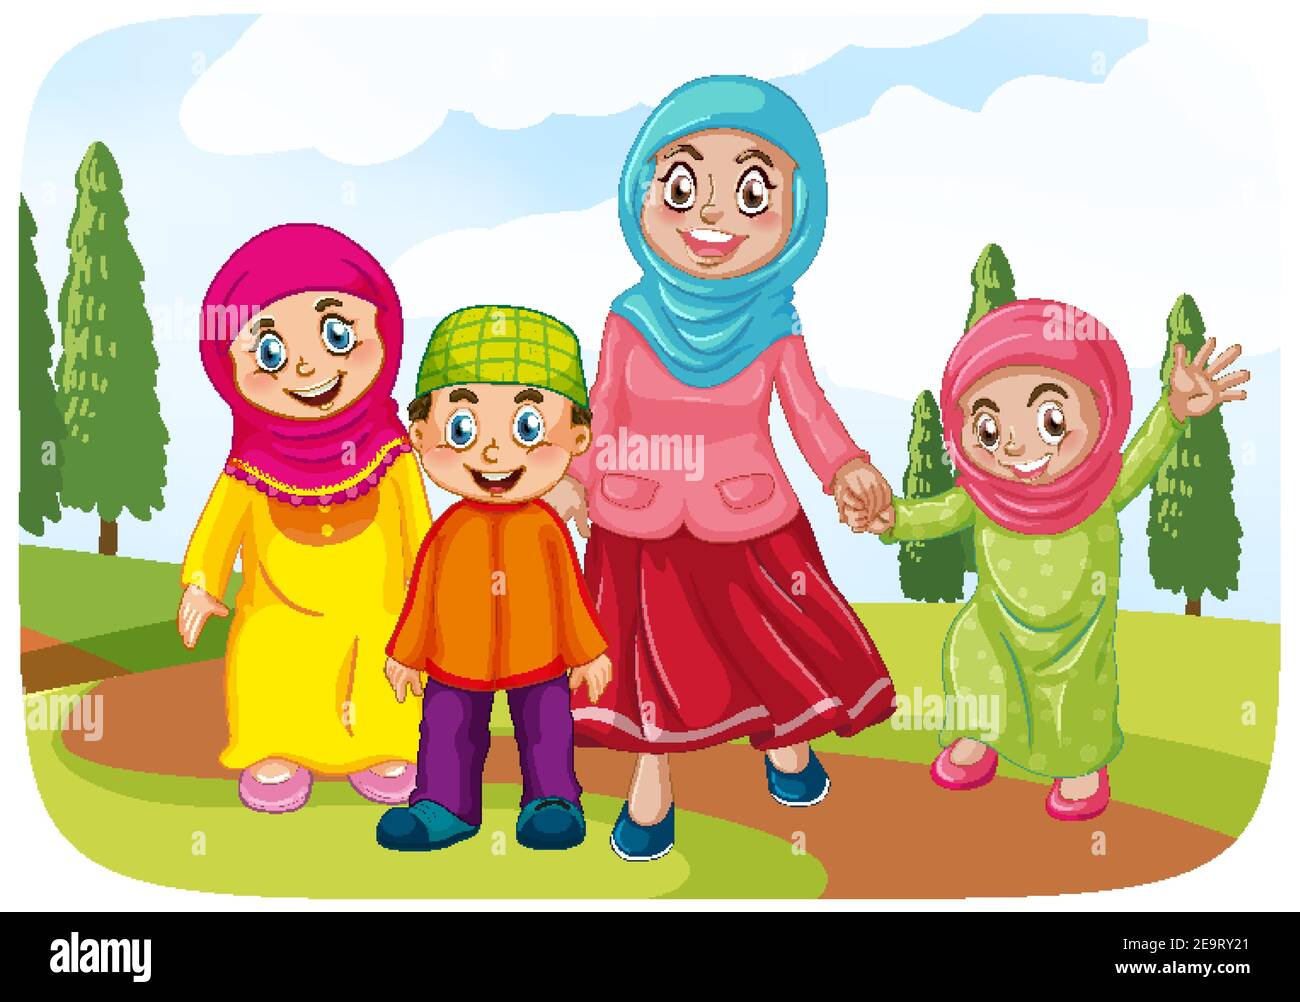 Muslim mother with her childs illustration Stock Vector